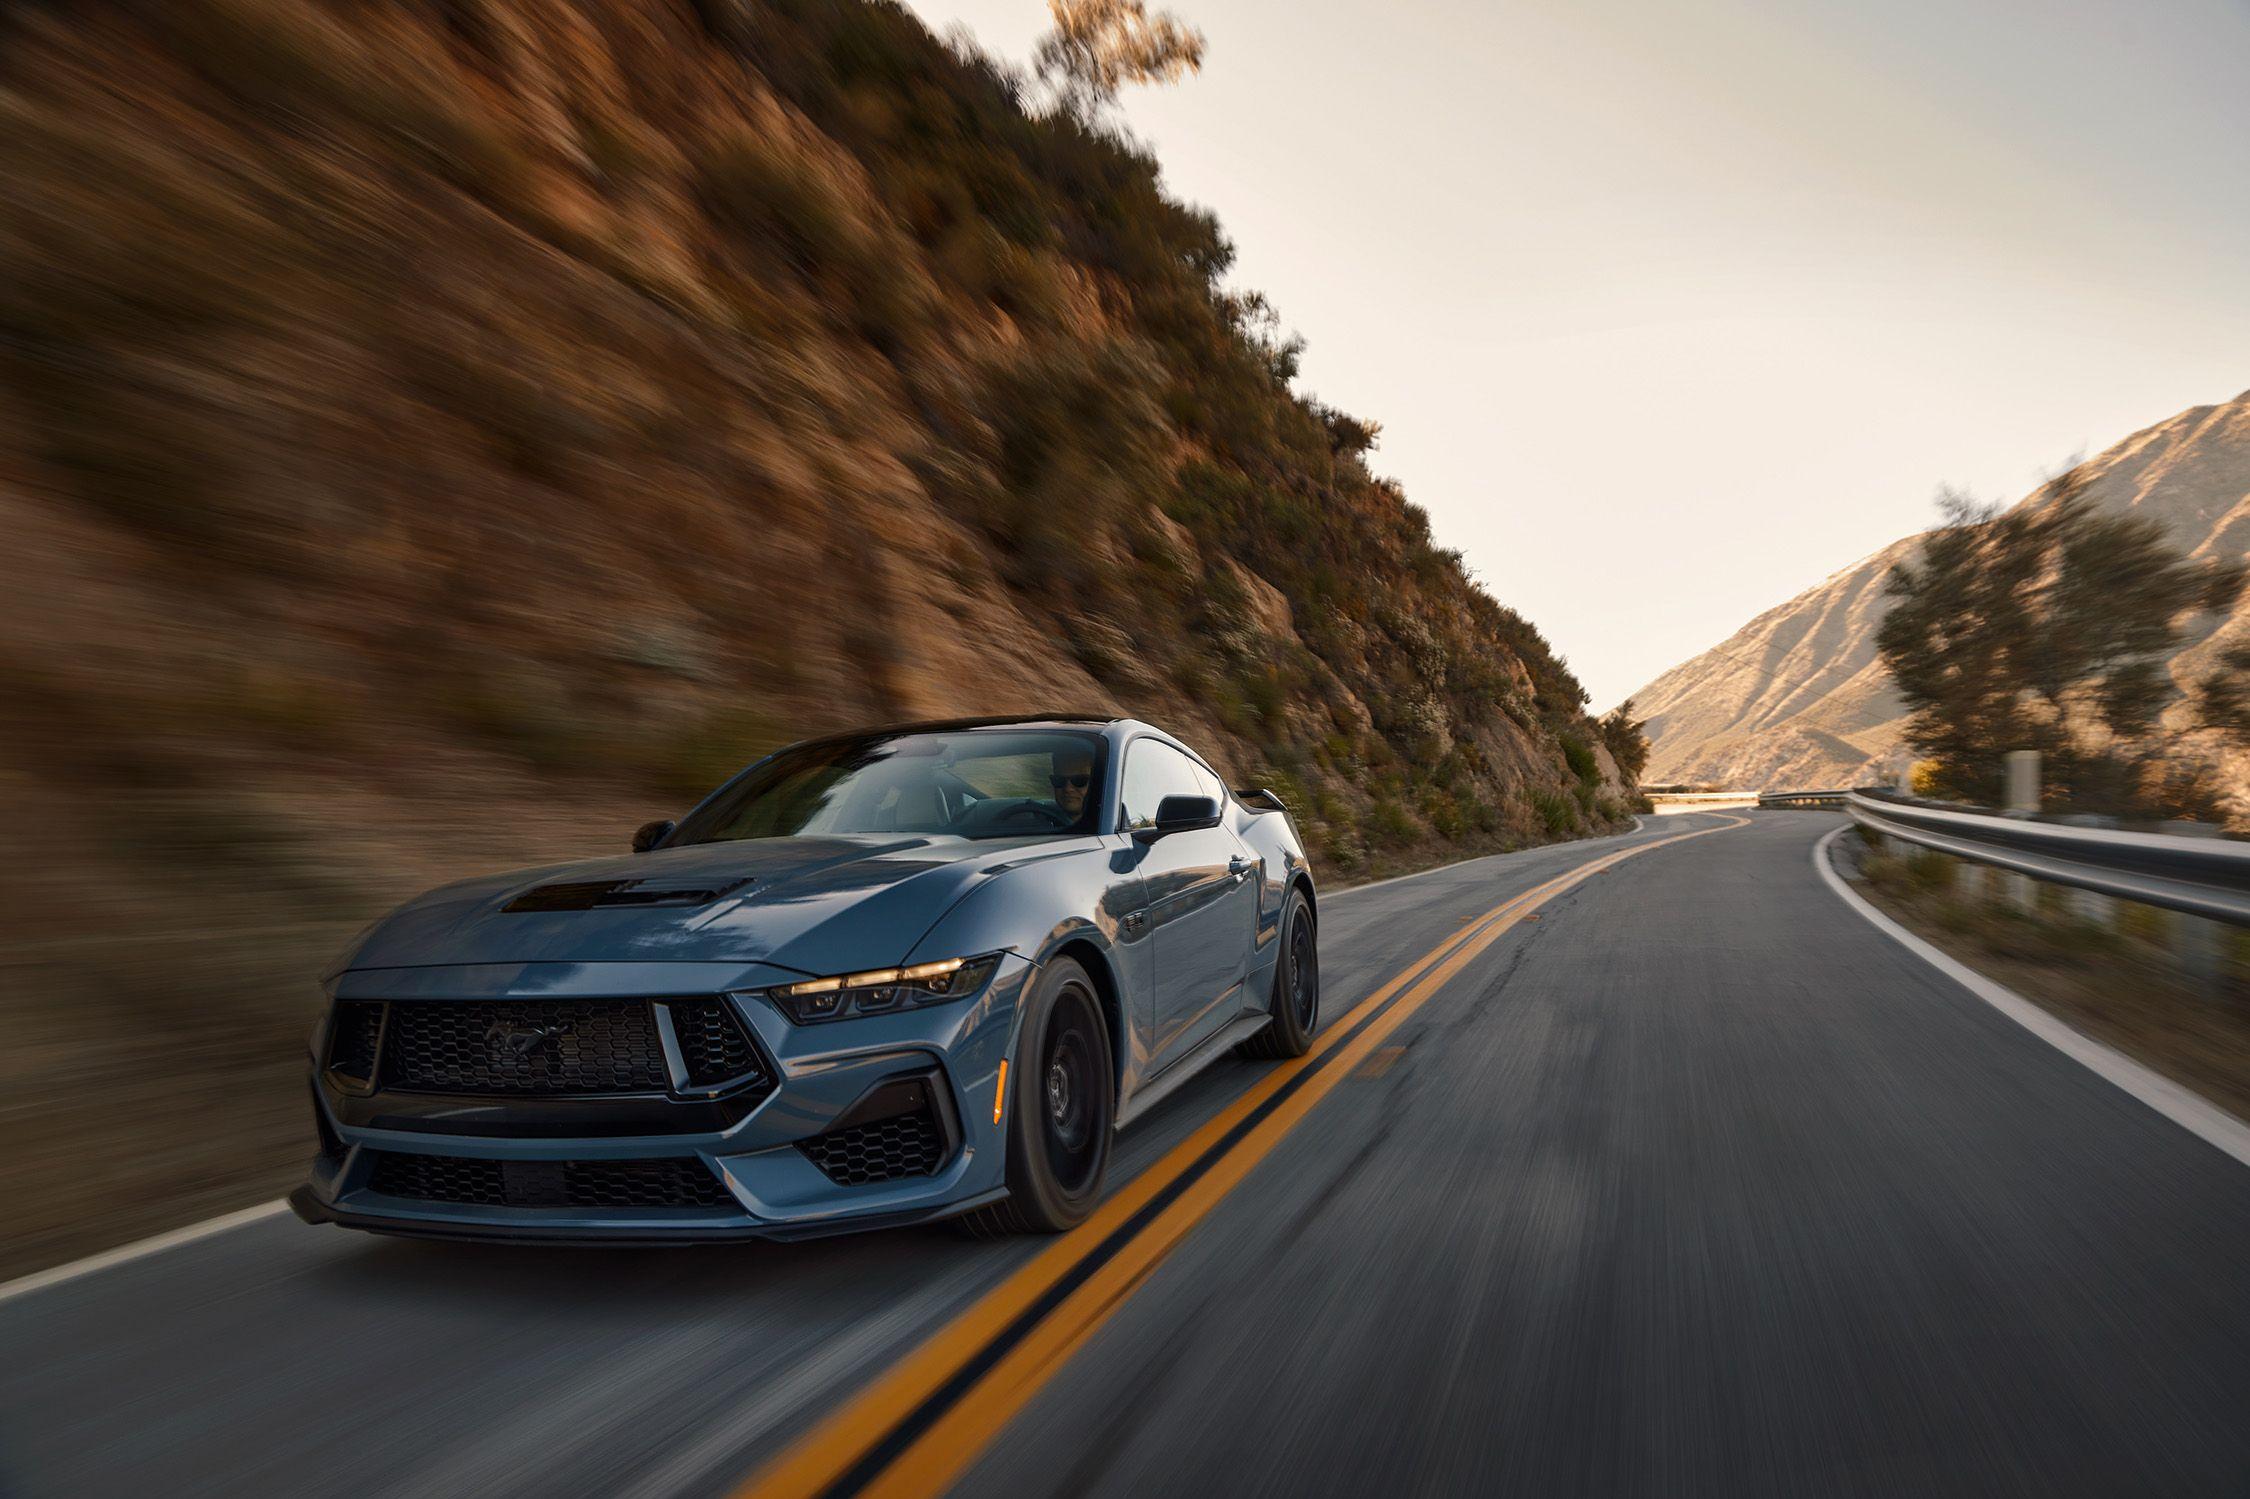 Photos Of The Ford Mustang Gt